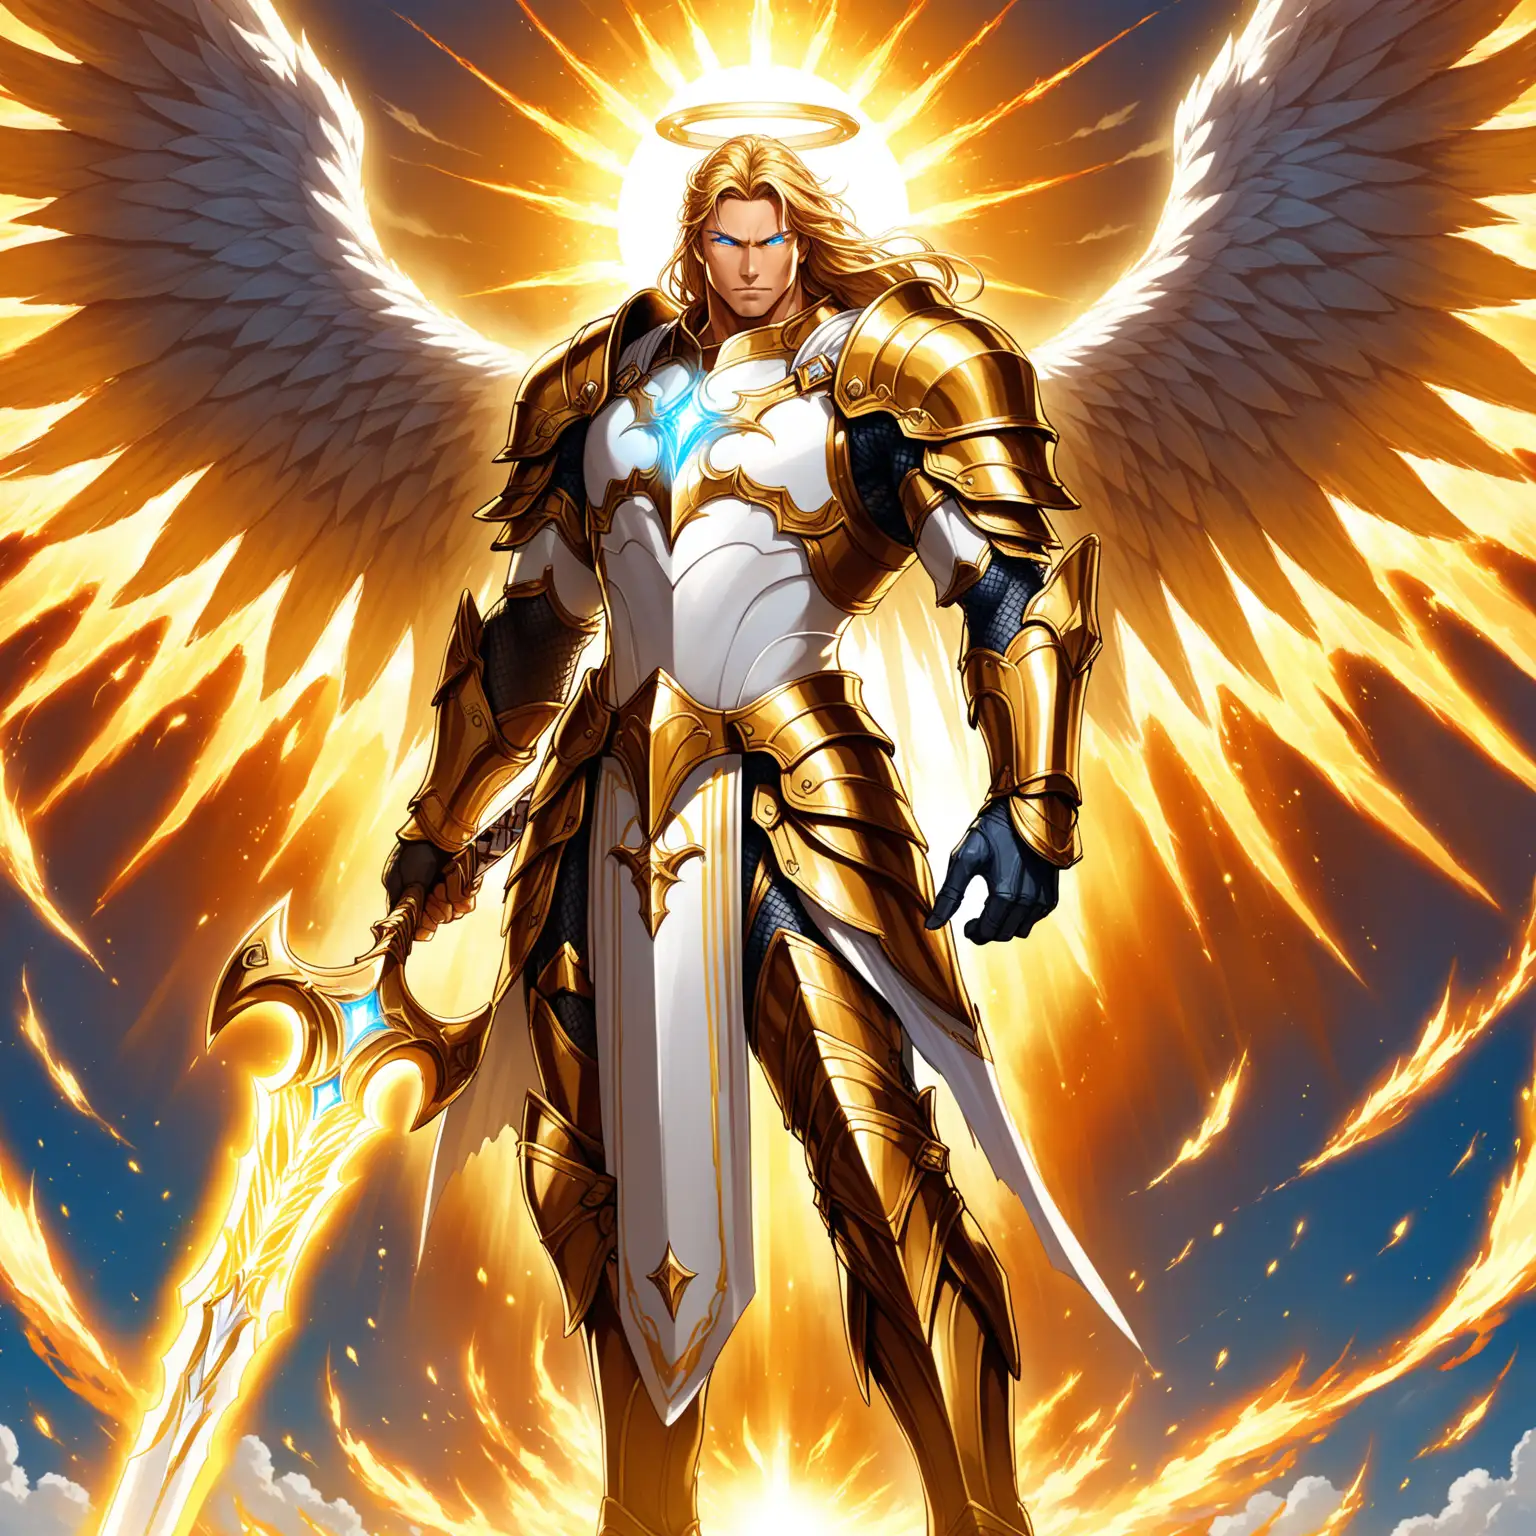 1 man. He is the god of Dawn and Hope and a paladin. He is an angel with huge wings made of fire and a halo of light. He is handsome and muscular. He has very long straight gold hair and light blue bright glowing eyes. He has a golden aura around him. He is wearing white knight armor with gold trim and a symbol of the rising sun on the chest. He is holding a gold greatsword with a glowing white blade. He is flying in the sky and it's sunrise. He is not wearing a helmet. He has an angry expression and looks powerful.